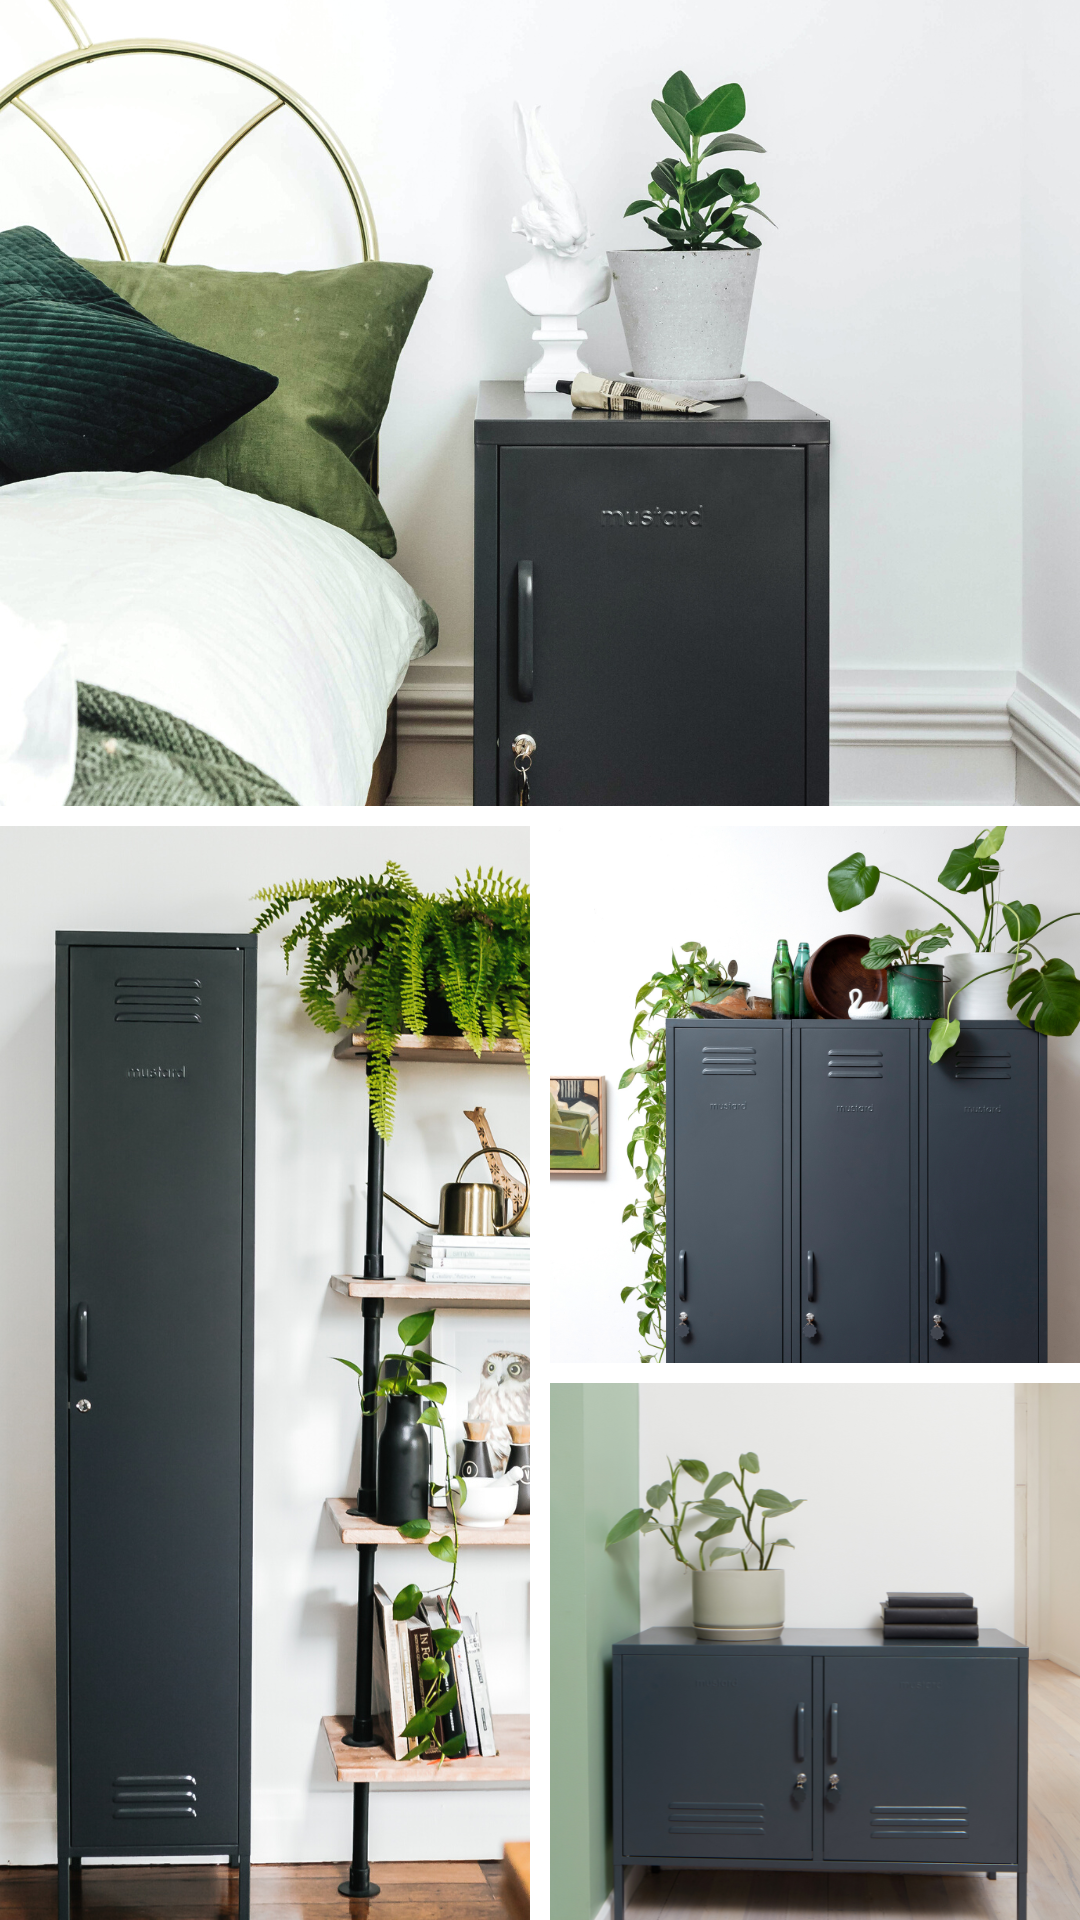 Collage of Slate lockers styled with green plants.